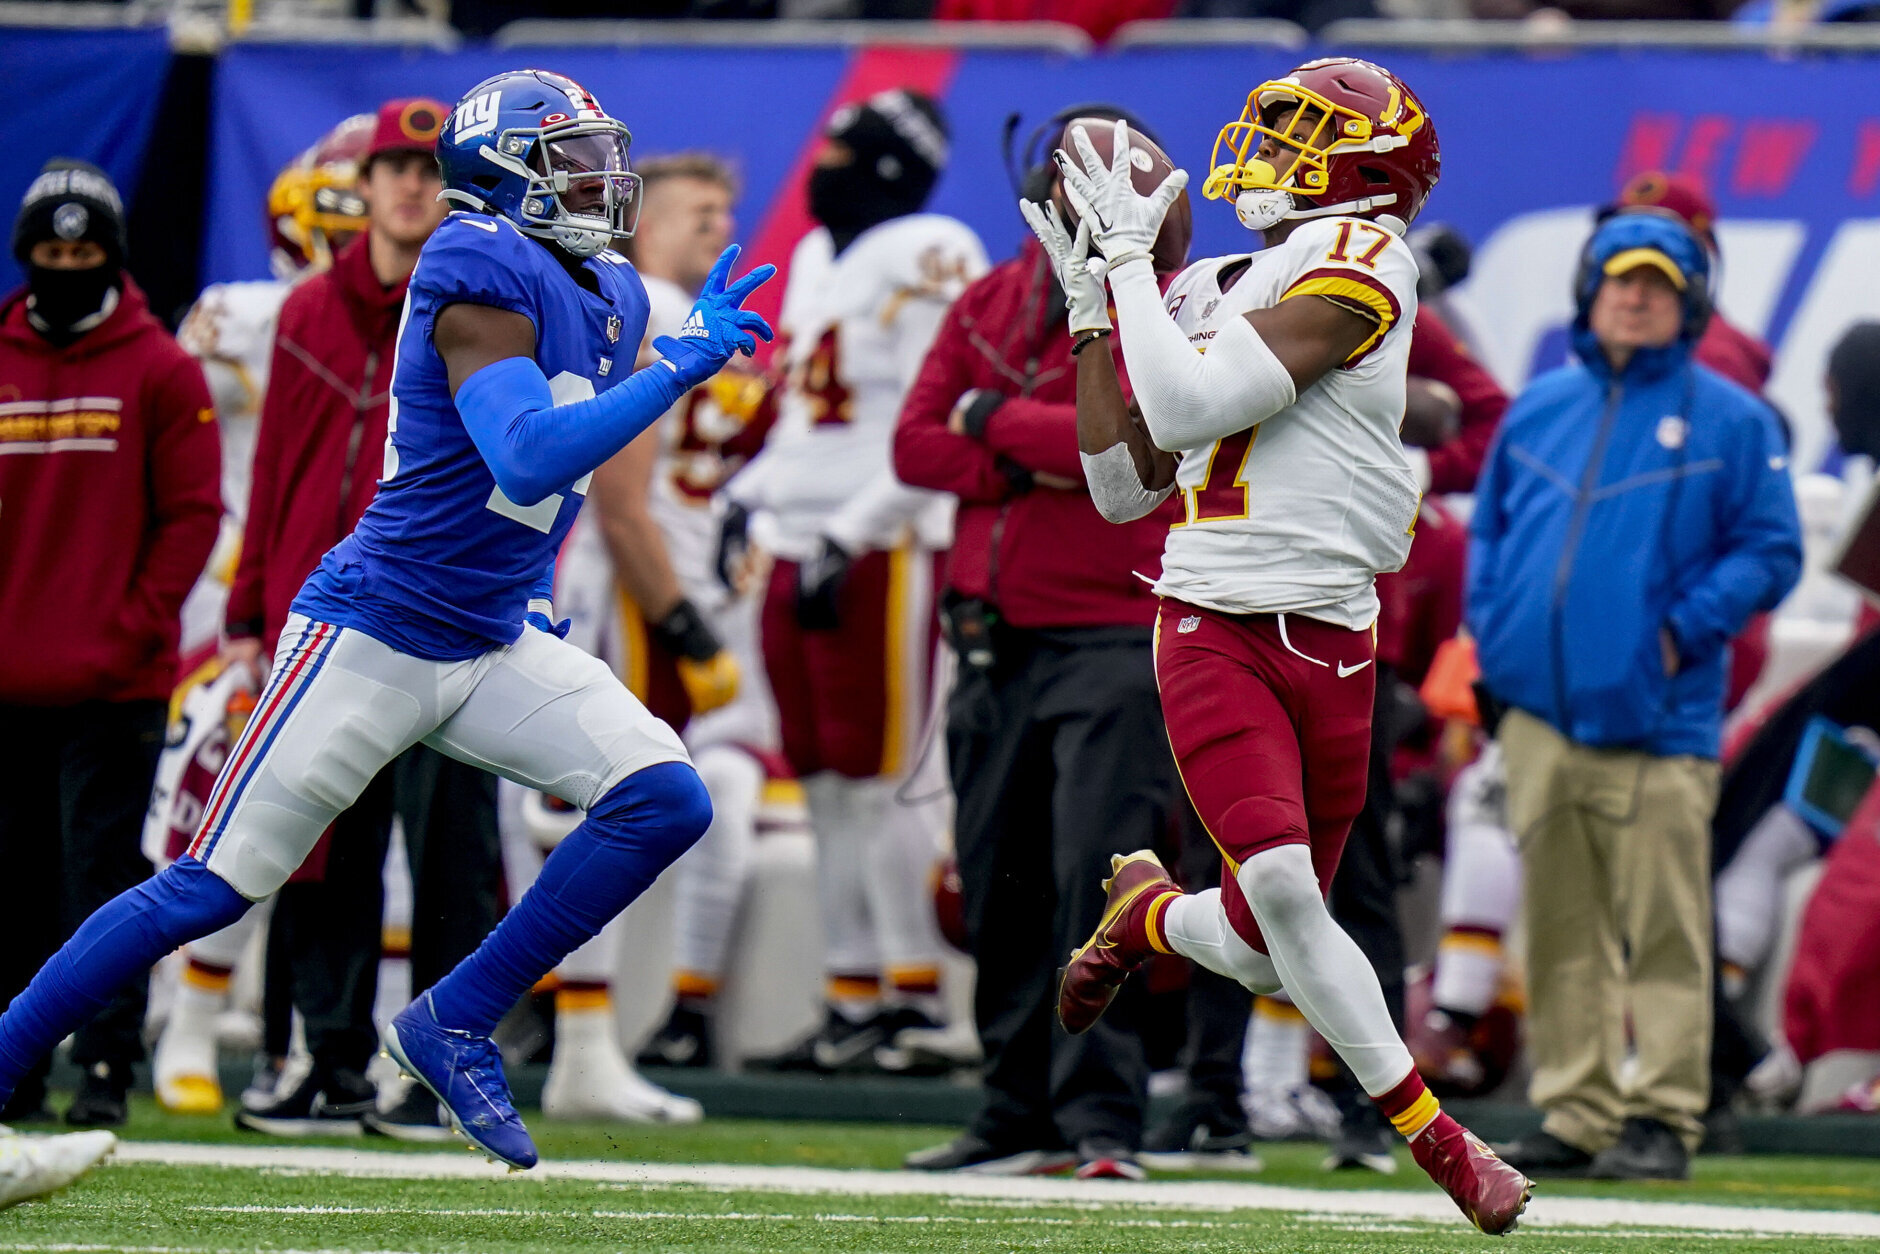 <p><em><strong>Washington 22</strong></em><br />
<em><strong>Giants 7</strong></em></p>
<p>Not that Terry McLaurin had to officially become the first Washington receiver with back-to-back 1,000-yard seasons since Henry Ellard (1994-96) for us to know this, but No. 17 is the Burgundy and Gold&#8217;s most important, most productive and most likable player on its roster. The only thing as important as securing a franchise quarterback is ensuring McLaurin remains here long enough to reap the benefits of that acquisition. Washington will almost certainly screw up the new name (<a href="https://ftw.usatoday.com/2022/01/washington-football-team-new-team-name-admirals" target="_blank" rel="noopener">maybe even before its announcement</a>) but it can&#8217;t afford to screw up a no-brainer signing.</p>
<p>And it&#8217;s good to see Ron Rivera get the last laugh over Joe Judge, the first Giants coach to lose 13 games in a season, including the franchise&#8217;s first streak of six straight double digit losses to end the year, thanks to <a href="https://wtop.com/nfl/2022/01/joe-judge-explains-giants-bizarre-qb-sneak-on-third-and-9-vs-washington/" target="_blank" rel="noopener">his stone cold idiocy</a>.</p>
<p>The Giants have an opportunity to lay the foundation for a turnaround with two top 10 picks in the upcoming draft — and if Judge and/or GM Dave Gettleman are around to put their fingerprints on those picks, it will be gross negligence on the part of this lost organization.</p>
